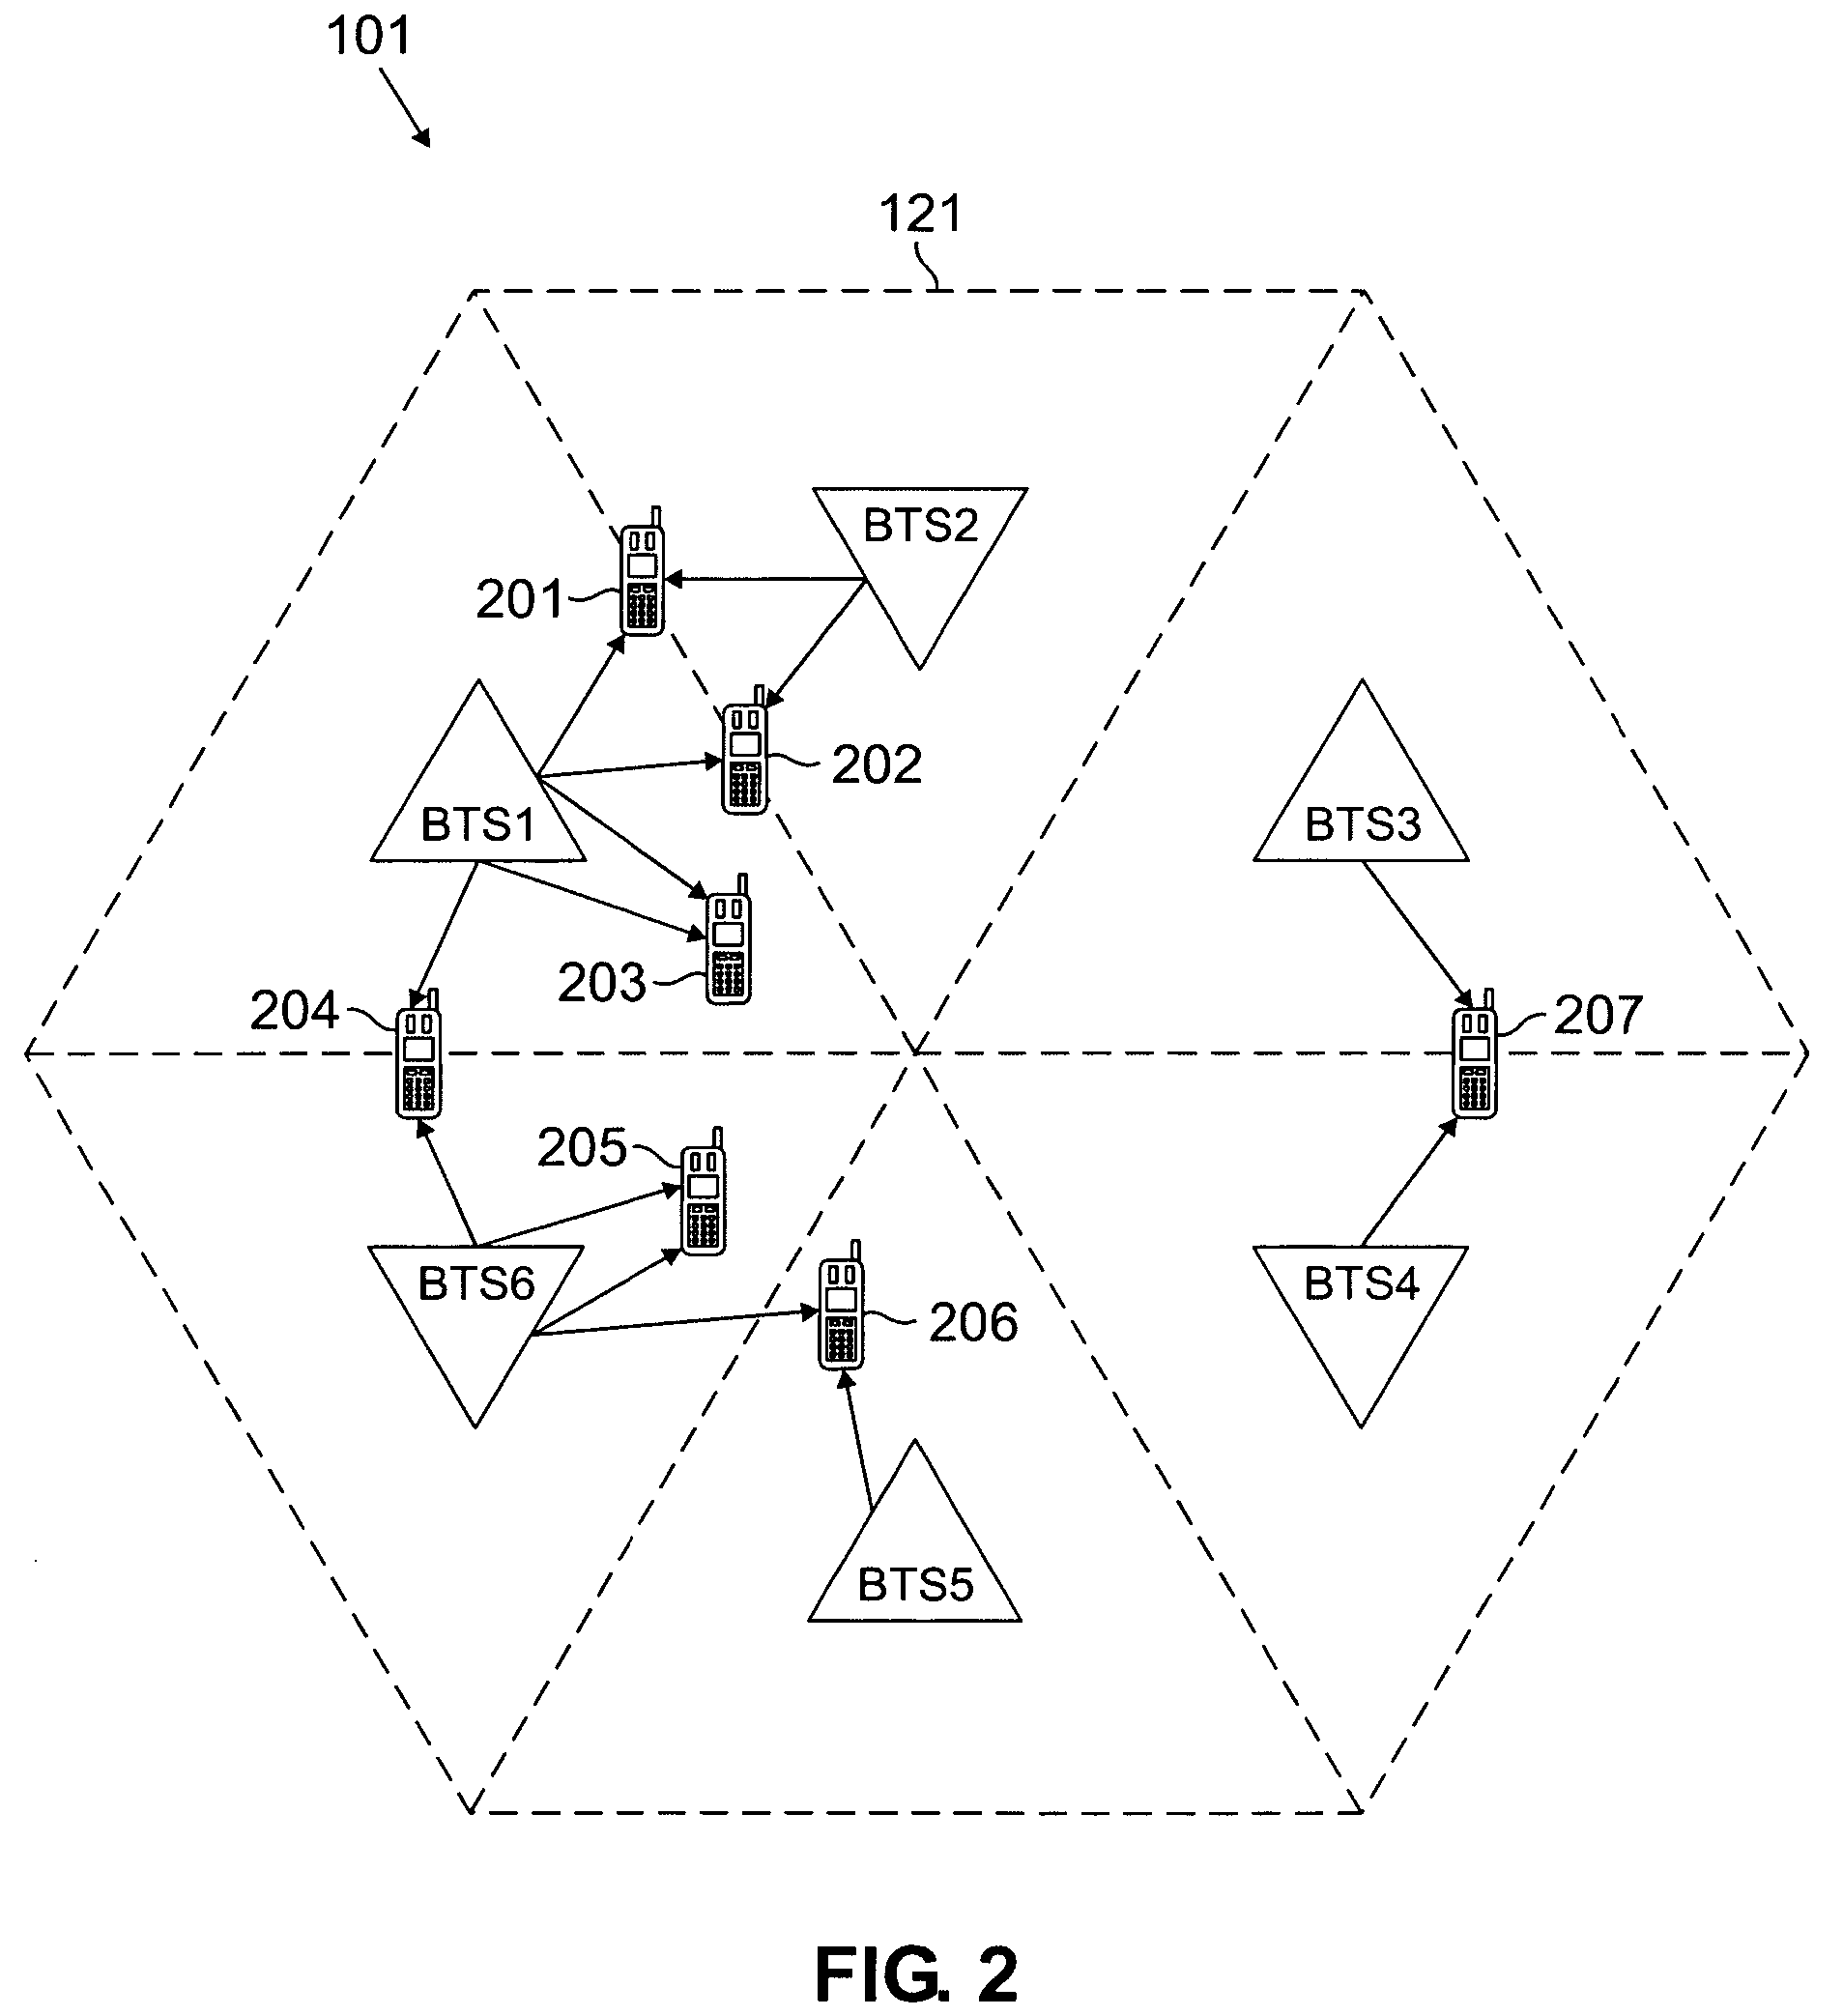 Apparatus and method for reducing paging channel loading for broadcast multicast services in a wireless network